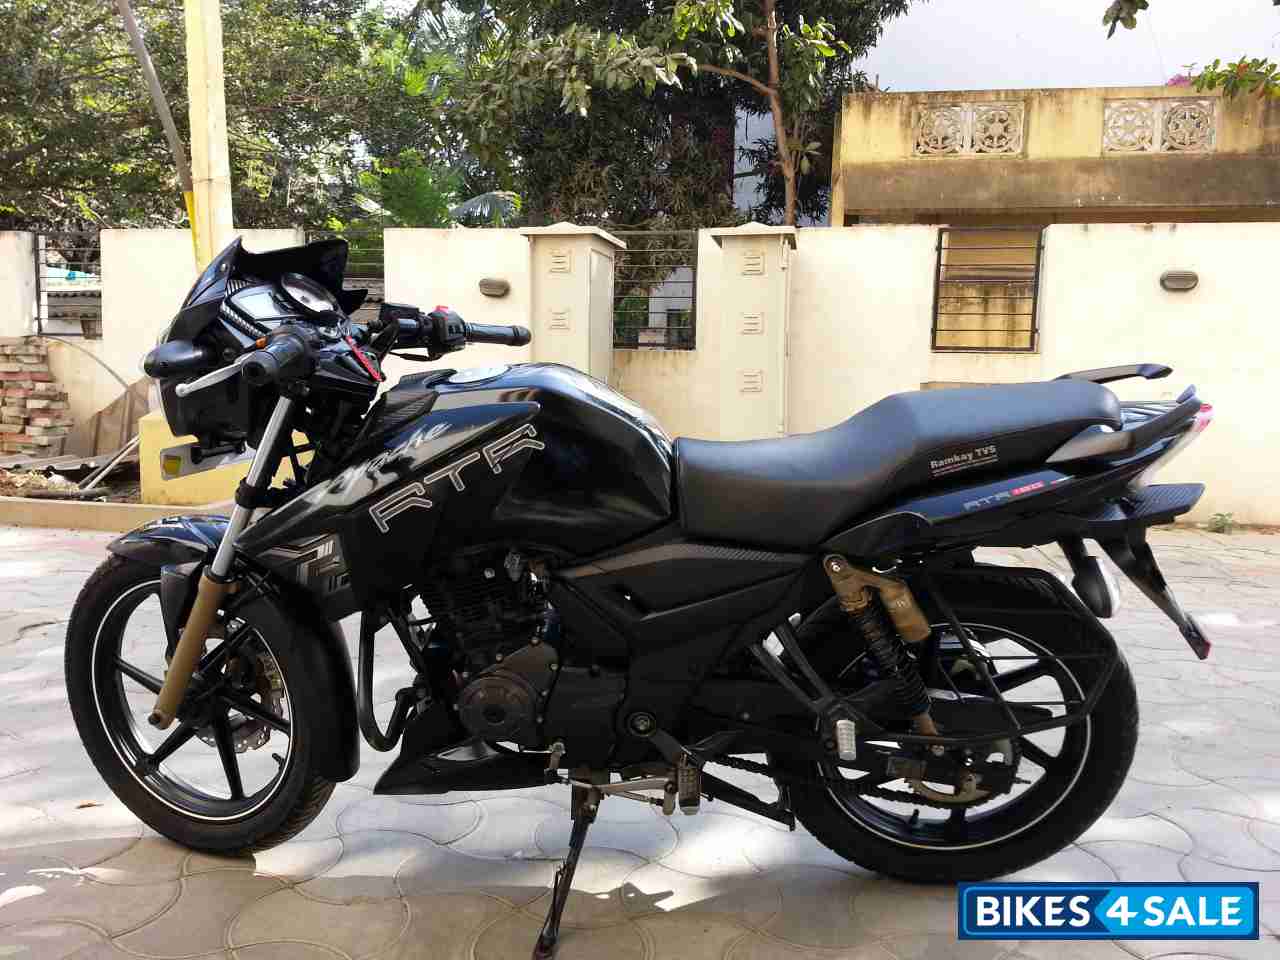 Used 2012 model TVS Apache RTR 180 for sale in Chennai. ID ...